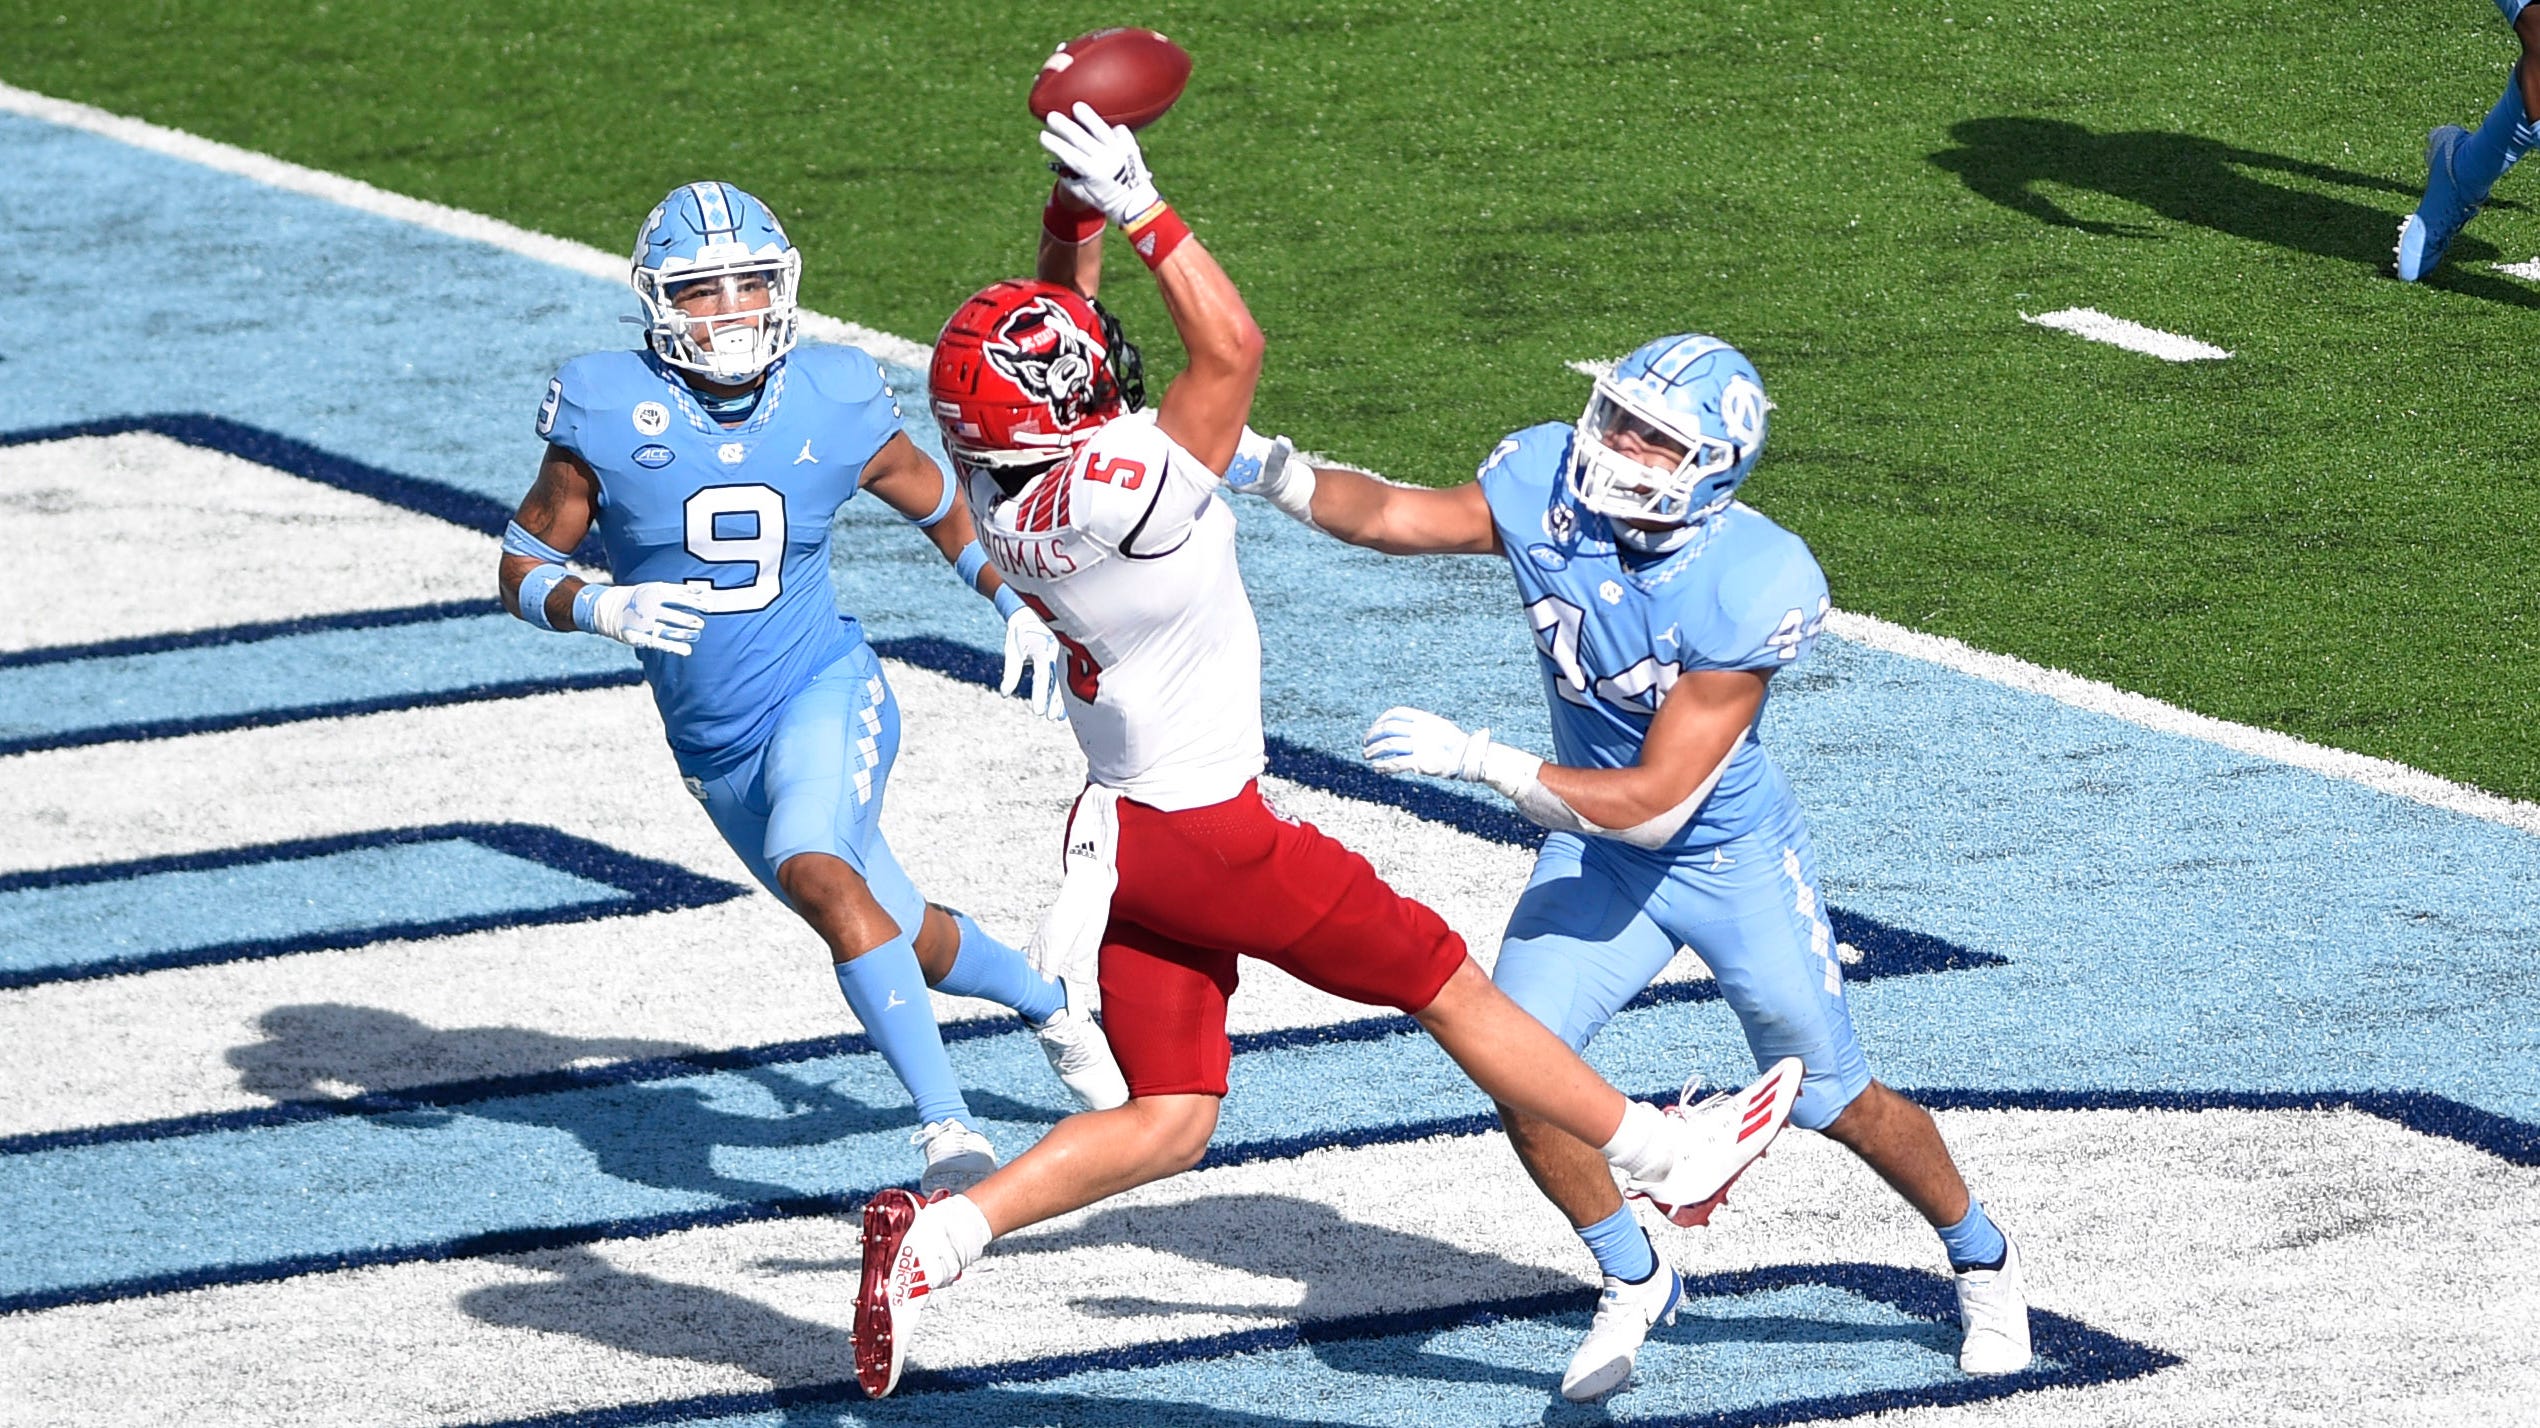 UNC stands in the way of N.C. State history and ACC title hopes